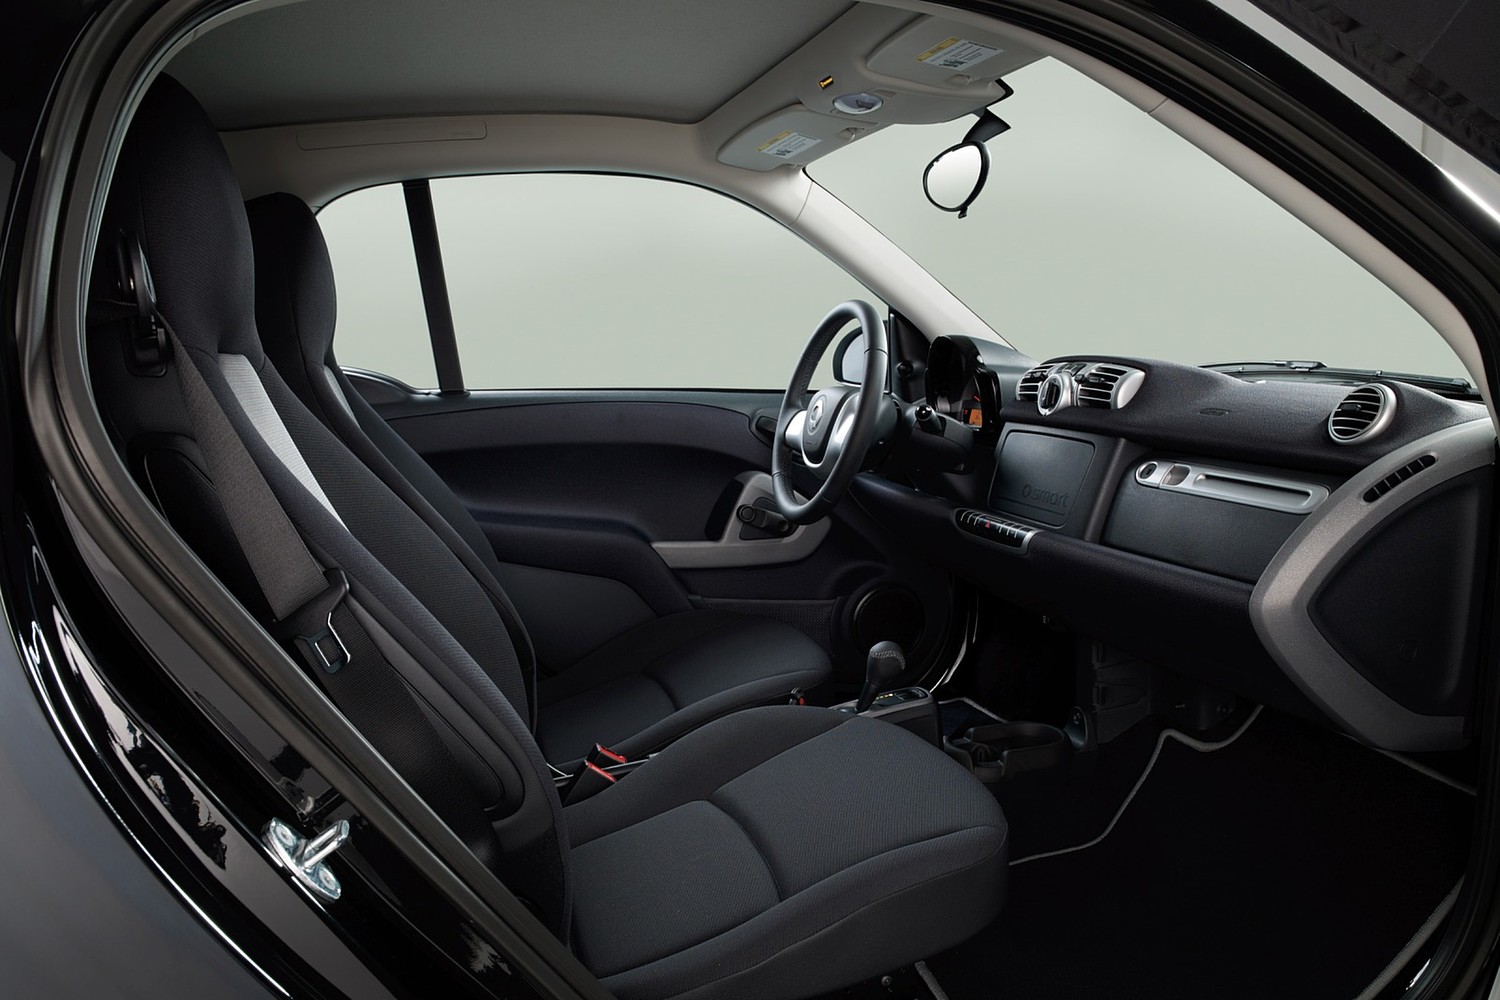 smart fortwo pure coupe 2dr Hatchback Interior (2013 model year shown)